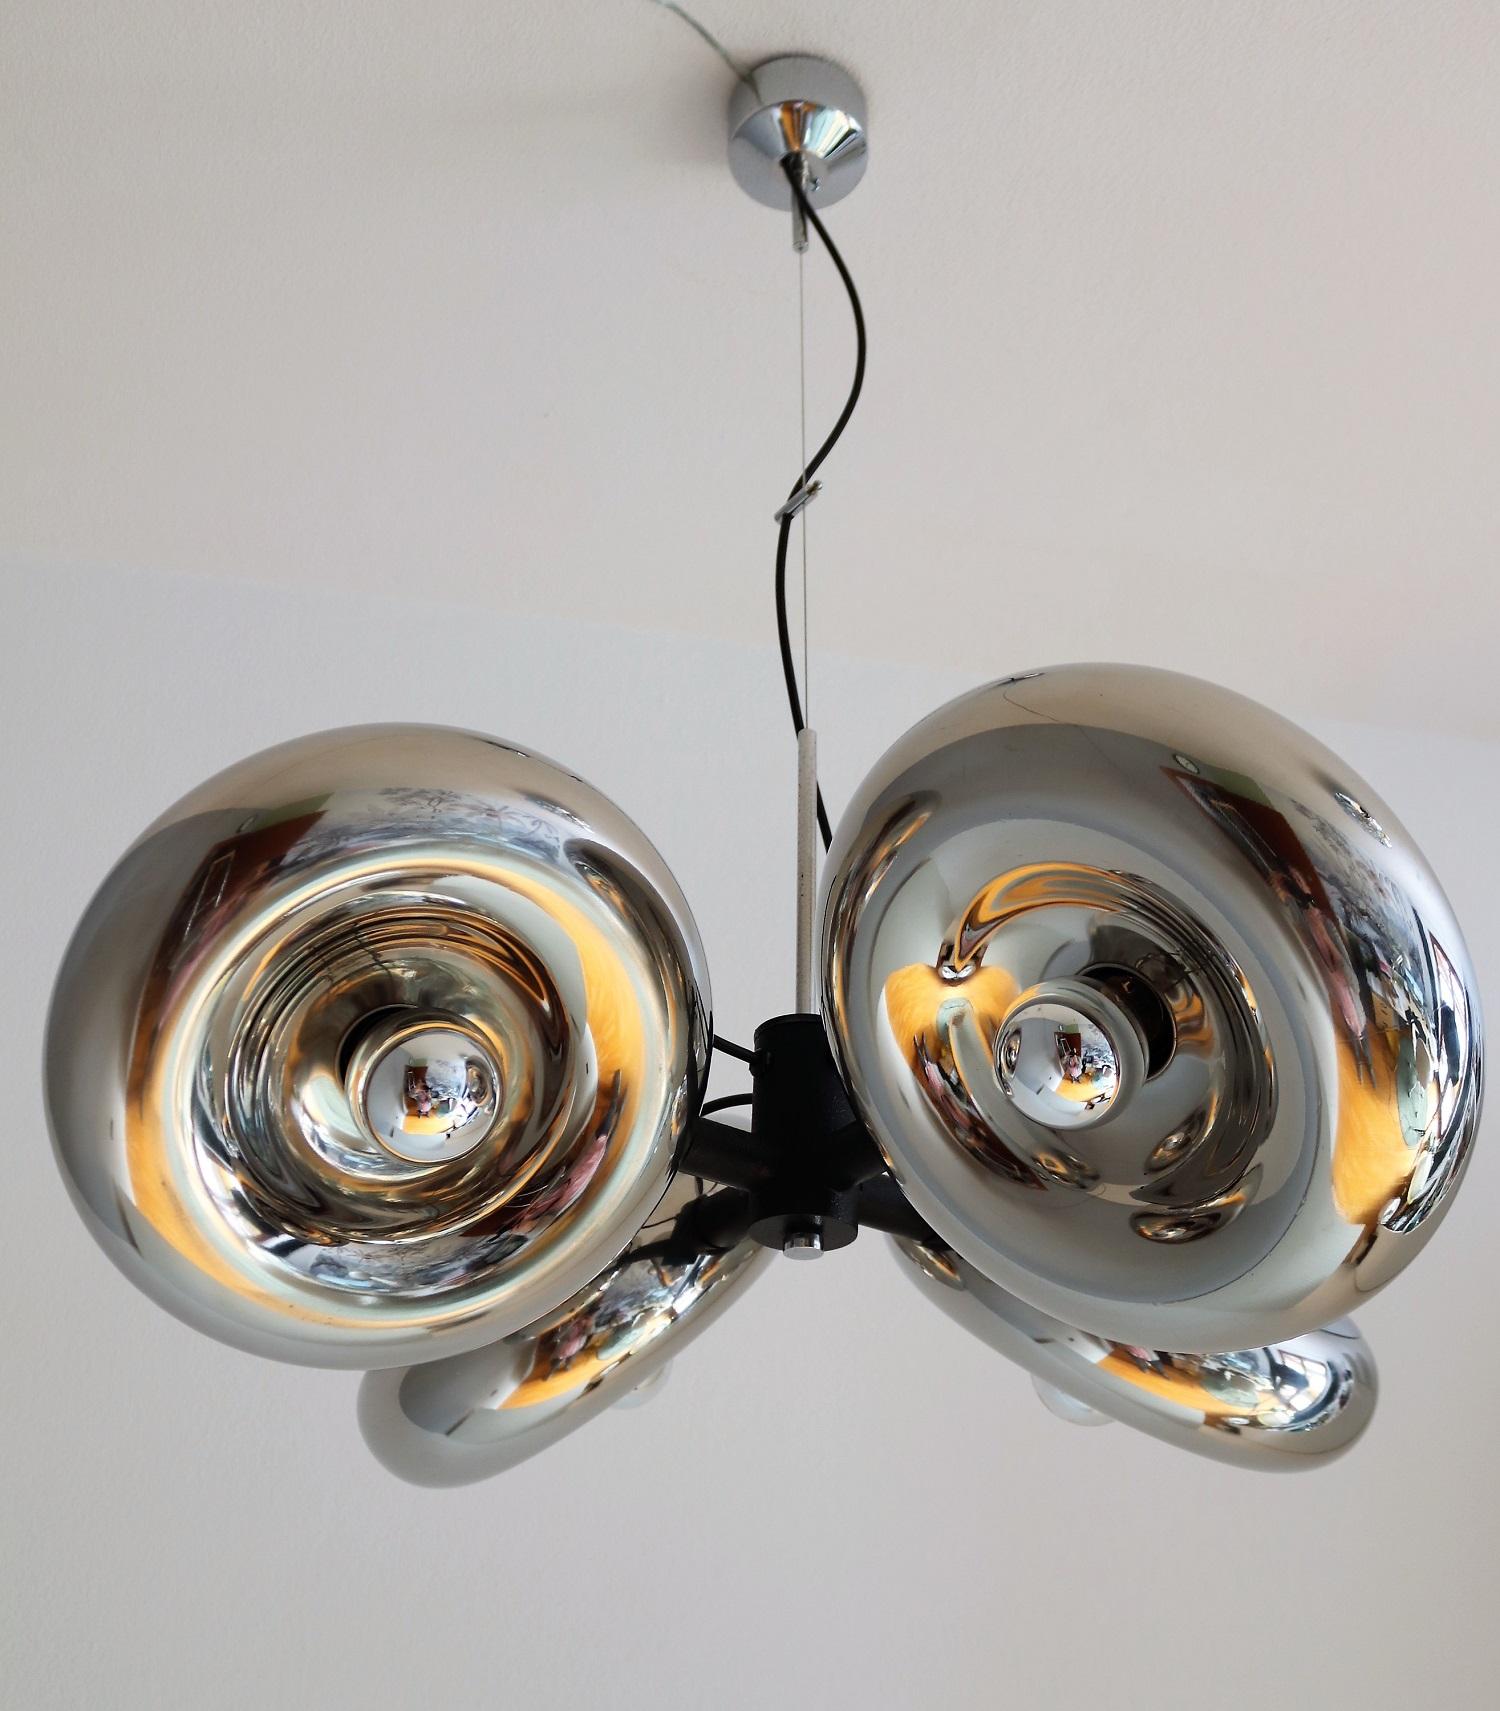 Late 20th Century Italian Chromed Pendant Lamp with Adjustable Lights by Luci Milano, 1970s